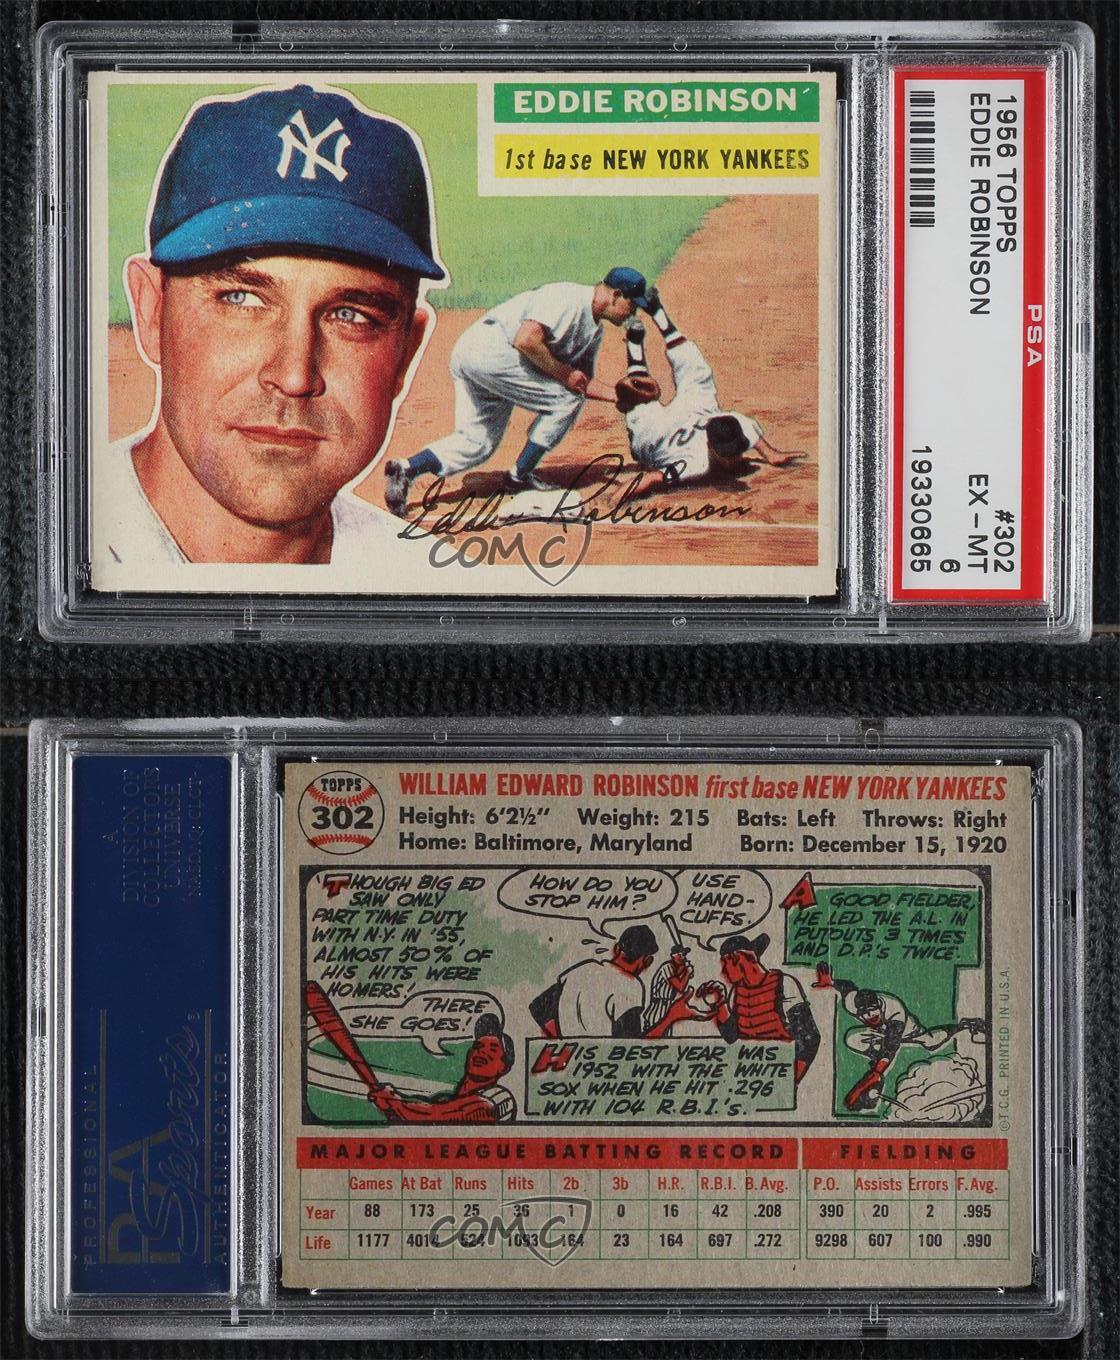 1956 Topps Eddie Robinson (Year Stats are all Visible) #302.1 PSA